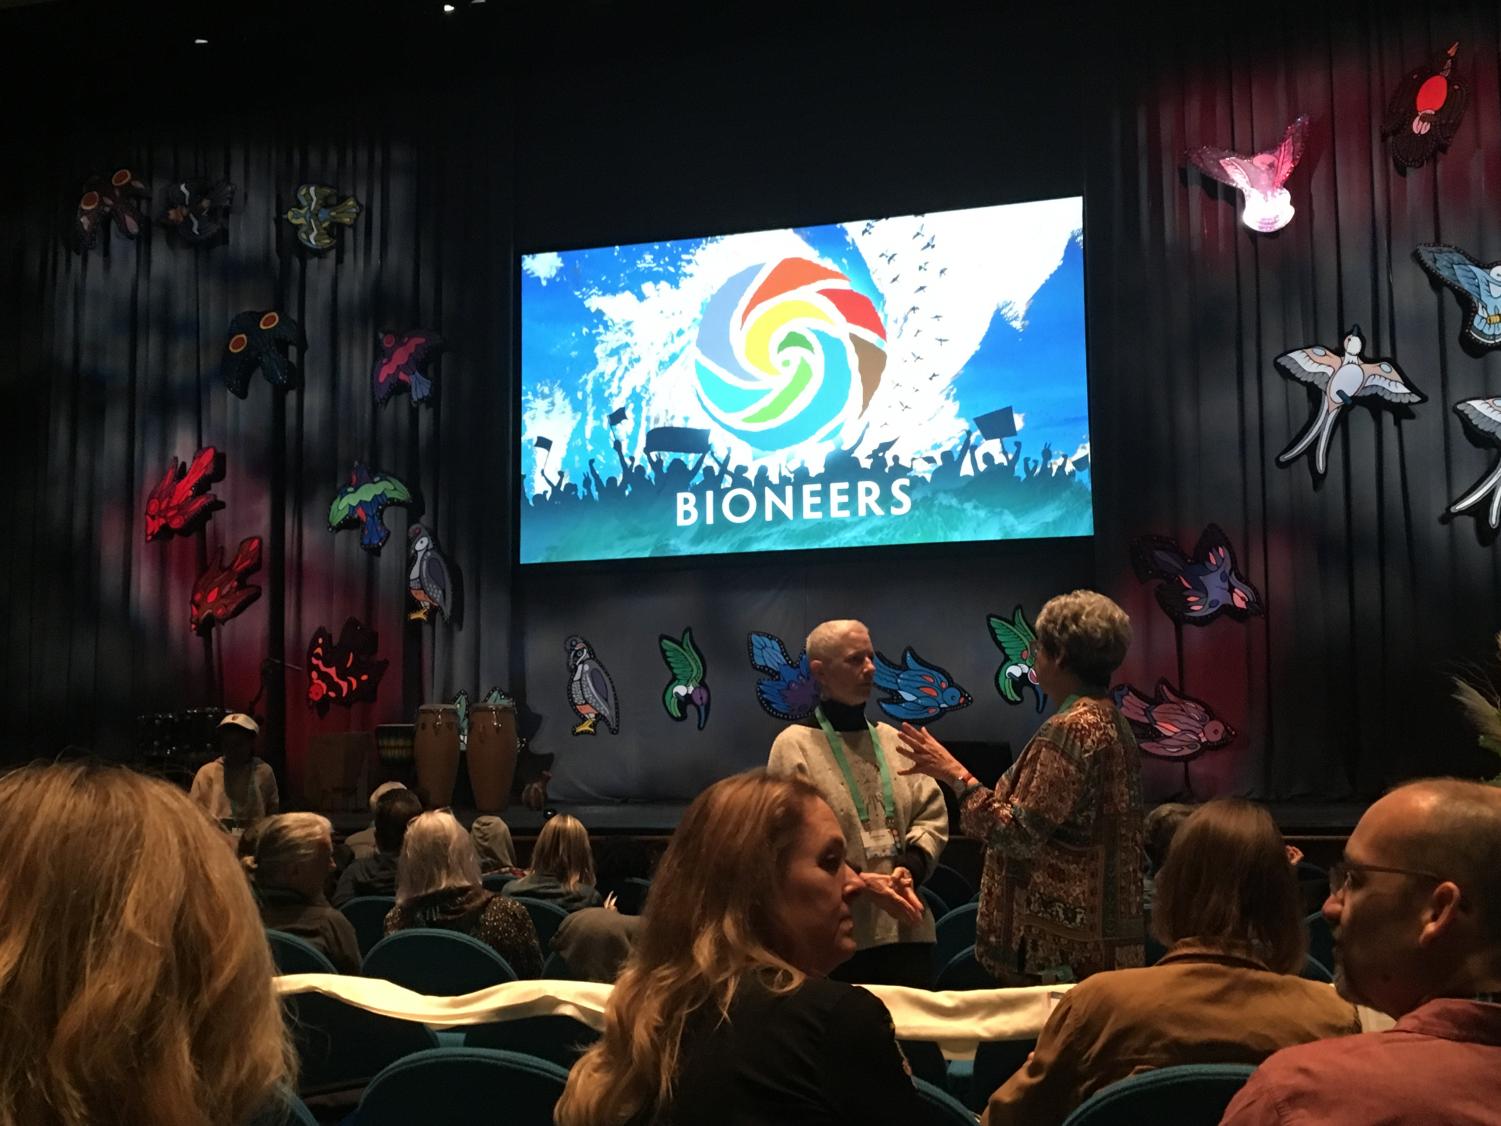 My+Experience+at+Bioneers+2017%3A+Rise+Up+and+Confront+Climate+Change